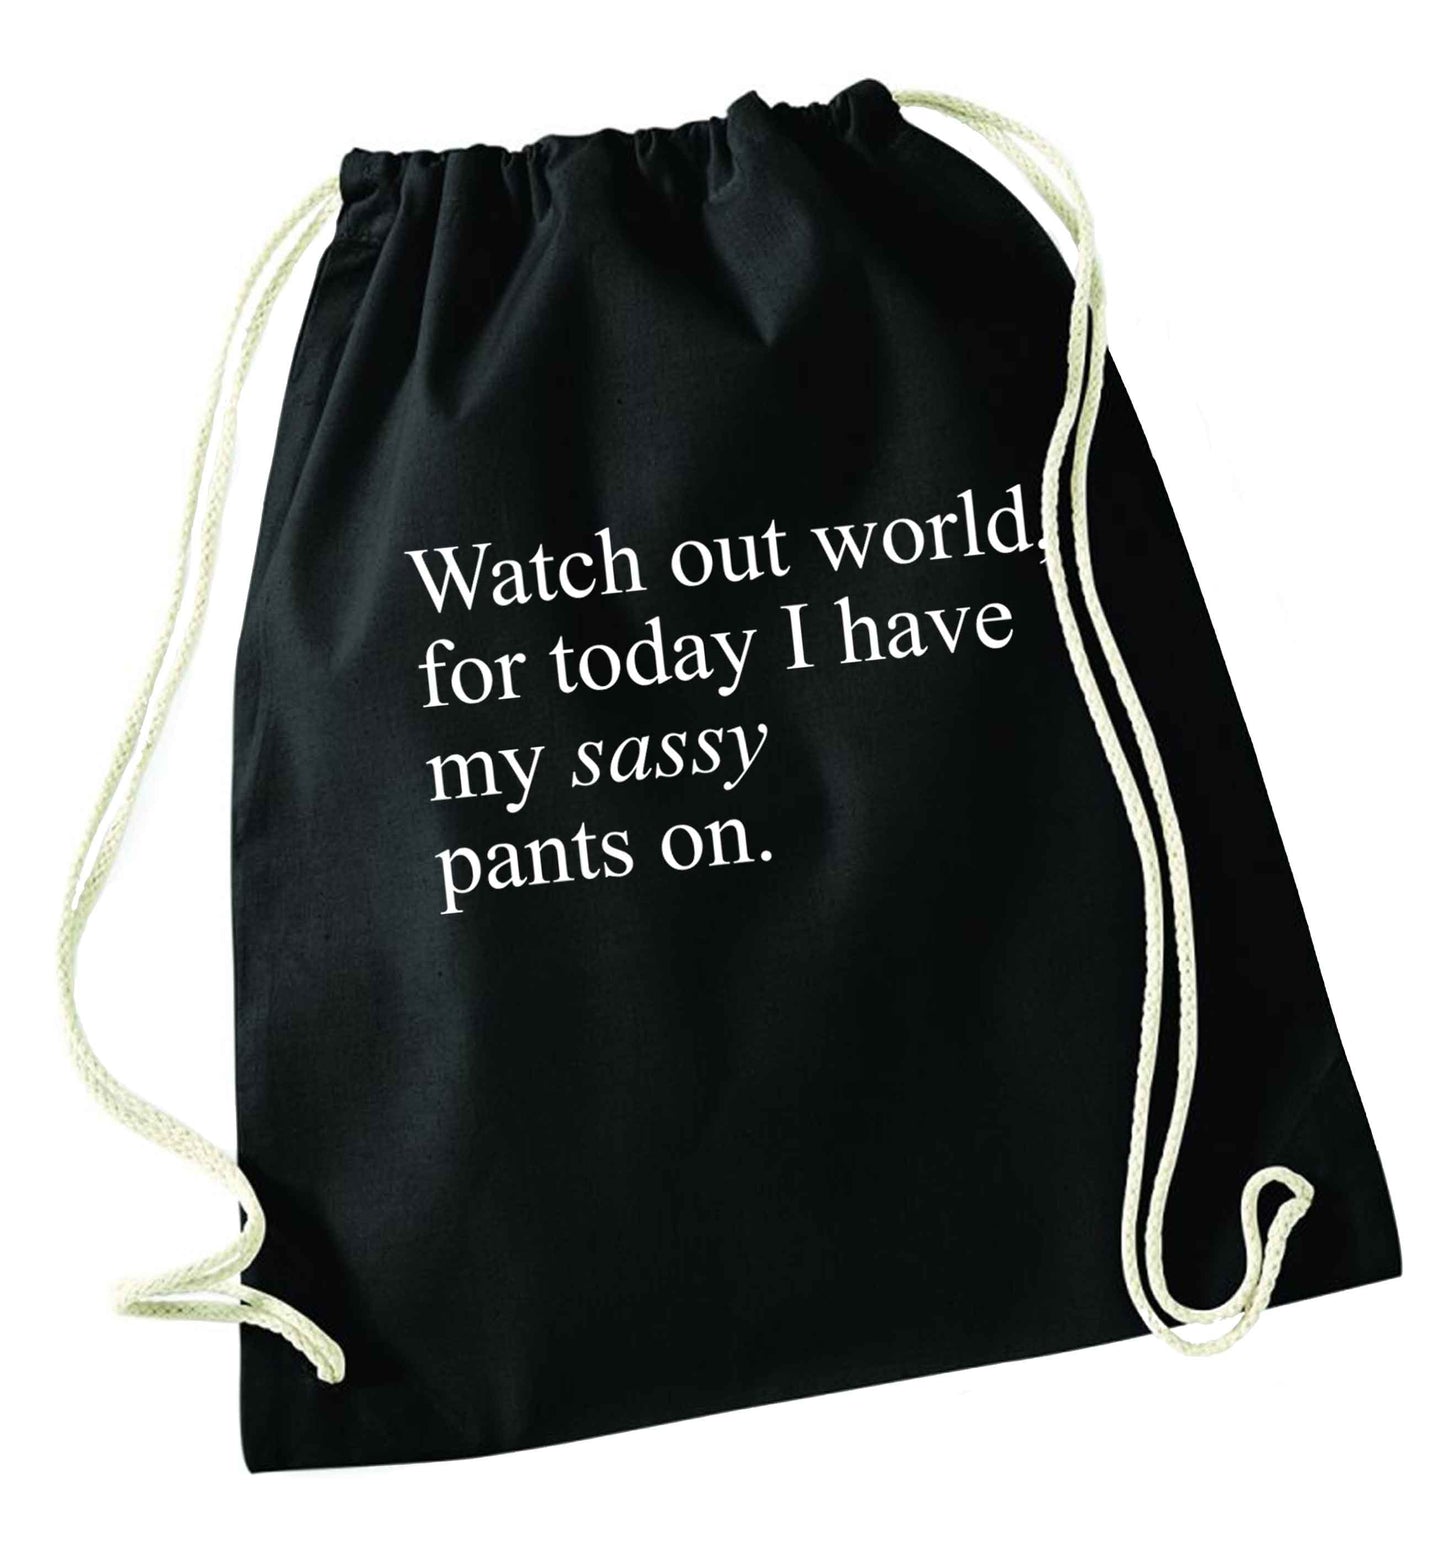 Watch out world for today I have my sassy pants on black drawstring bag